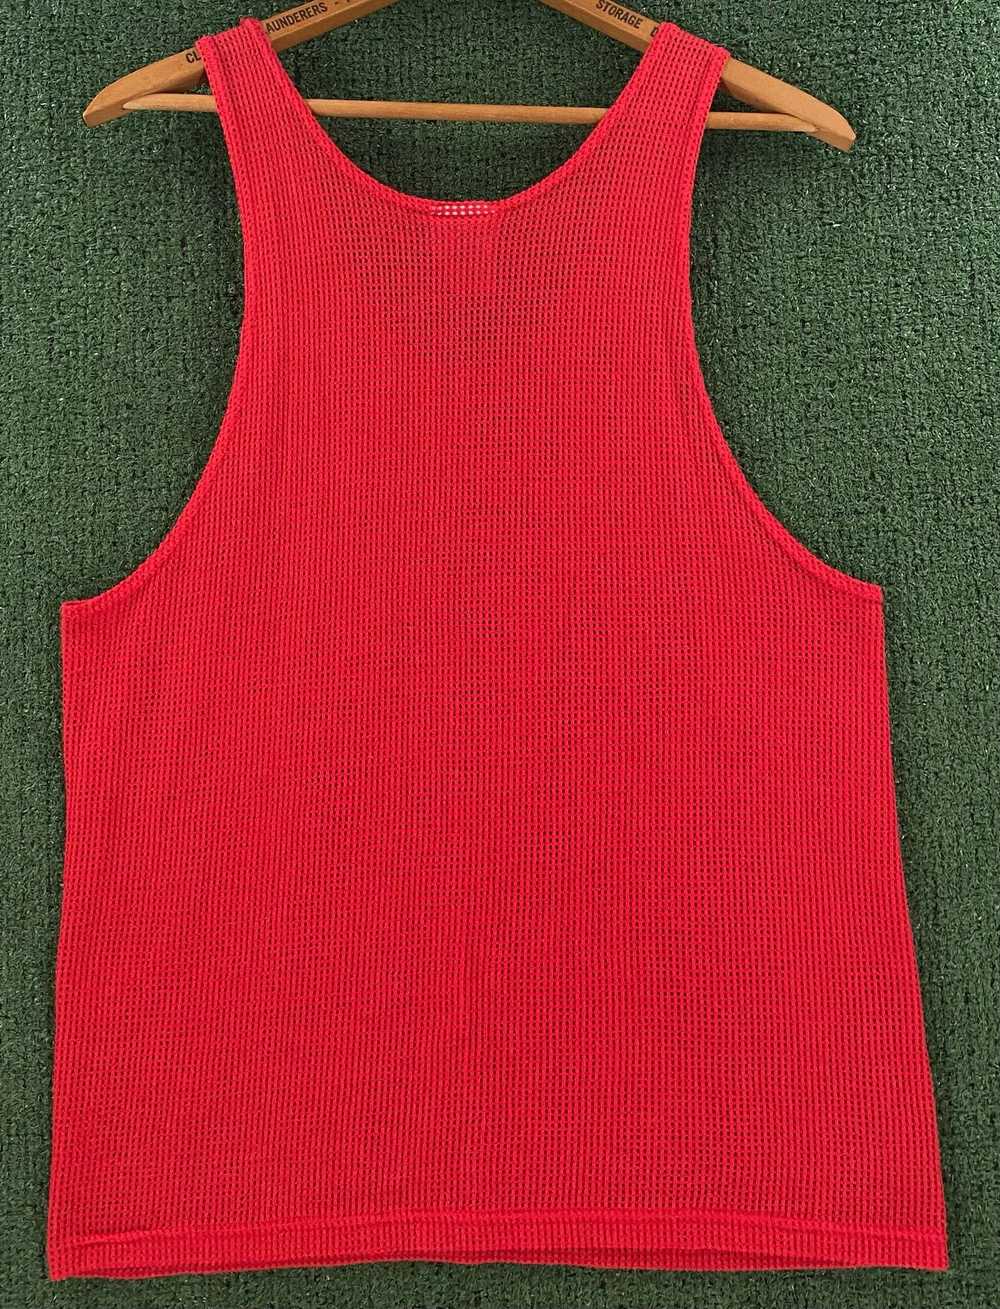 Basic Editions 80’s Mesh Red Polyester Cotton Ble… - image 4